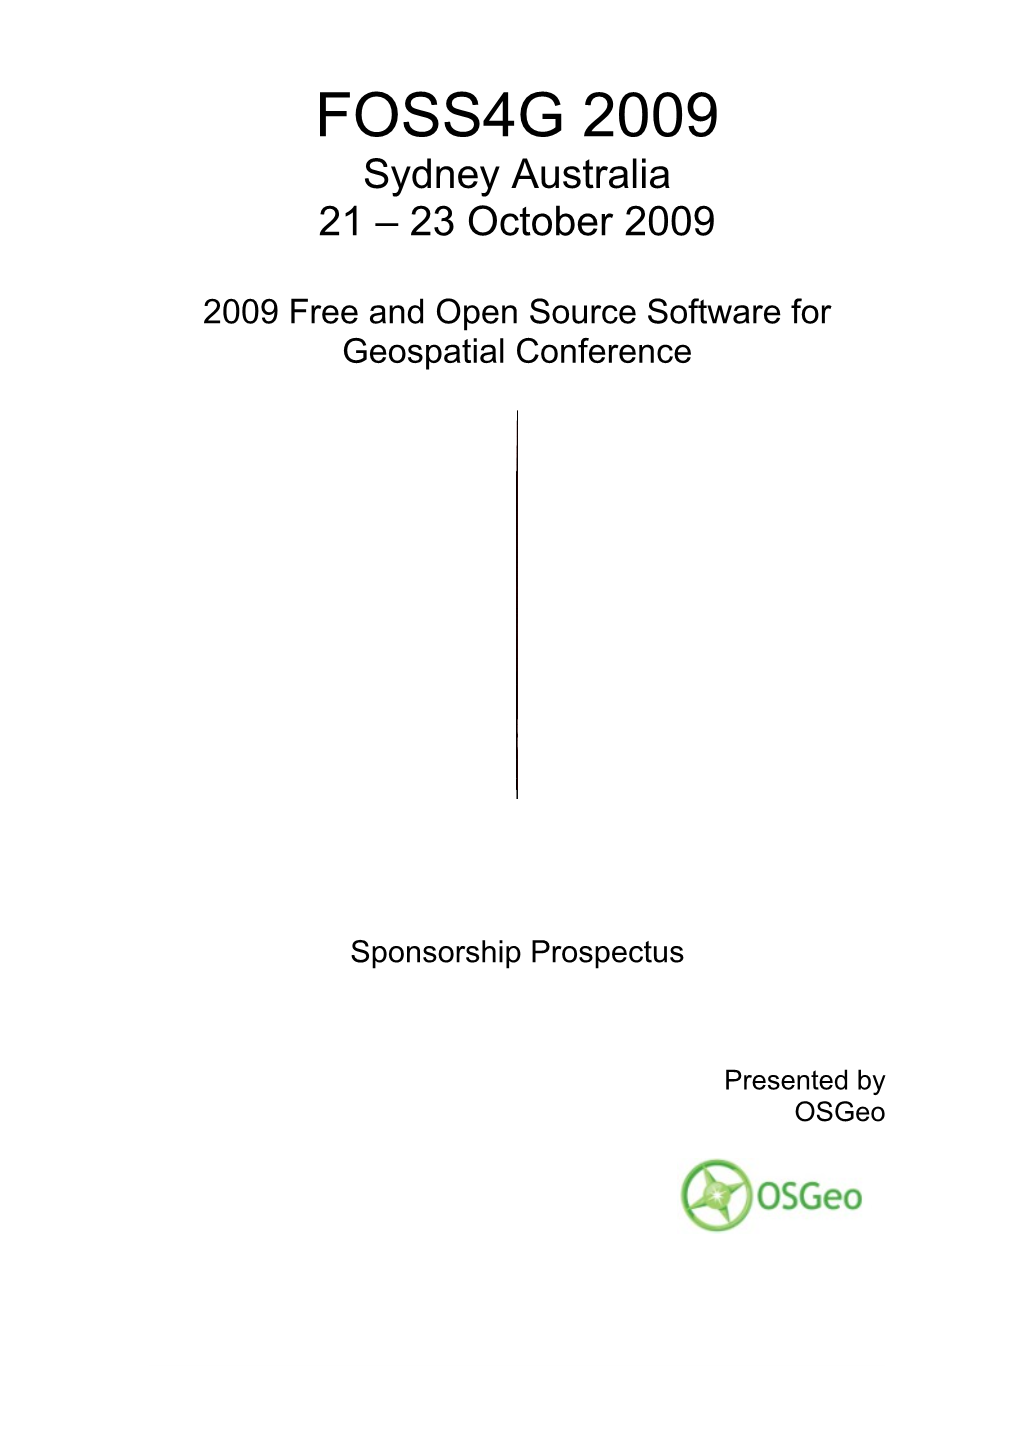 2009 Free and Open Source Software for Geospatial Conference